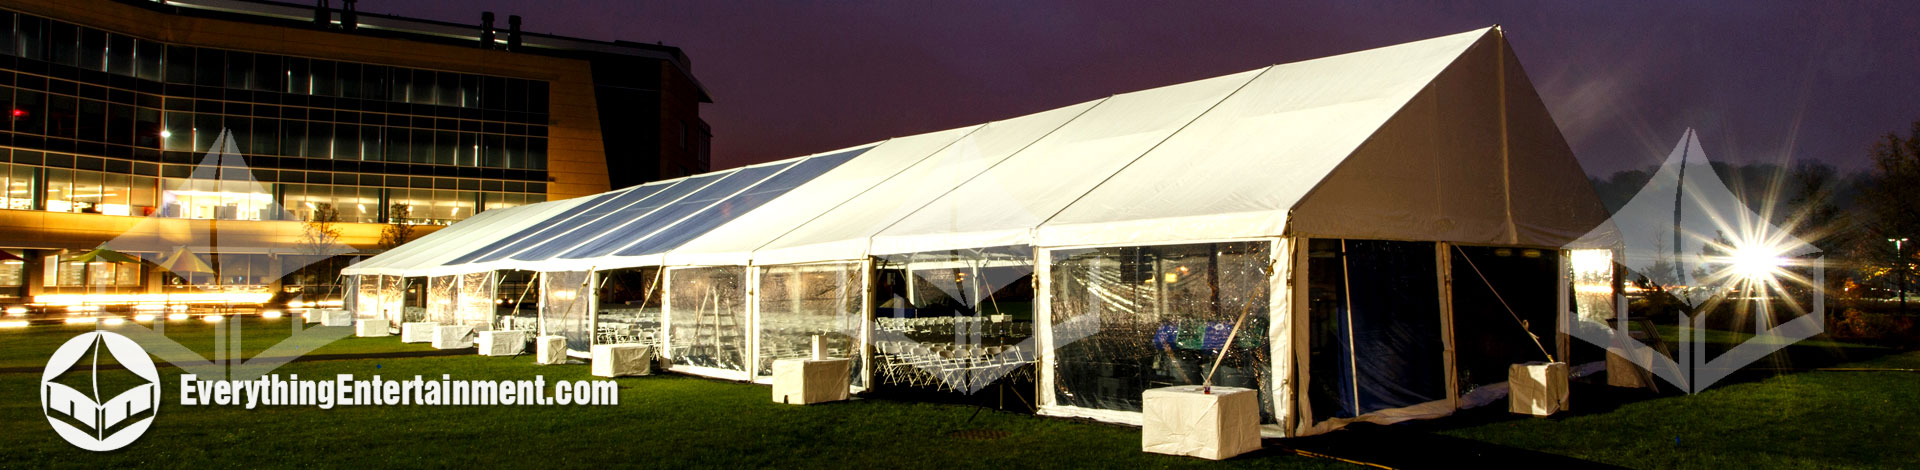 large 50x200 foot tent setup on grass in courtyard of business